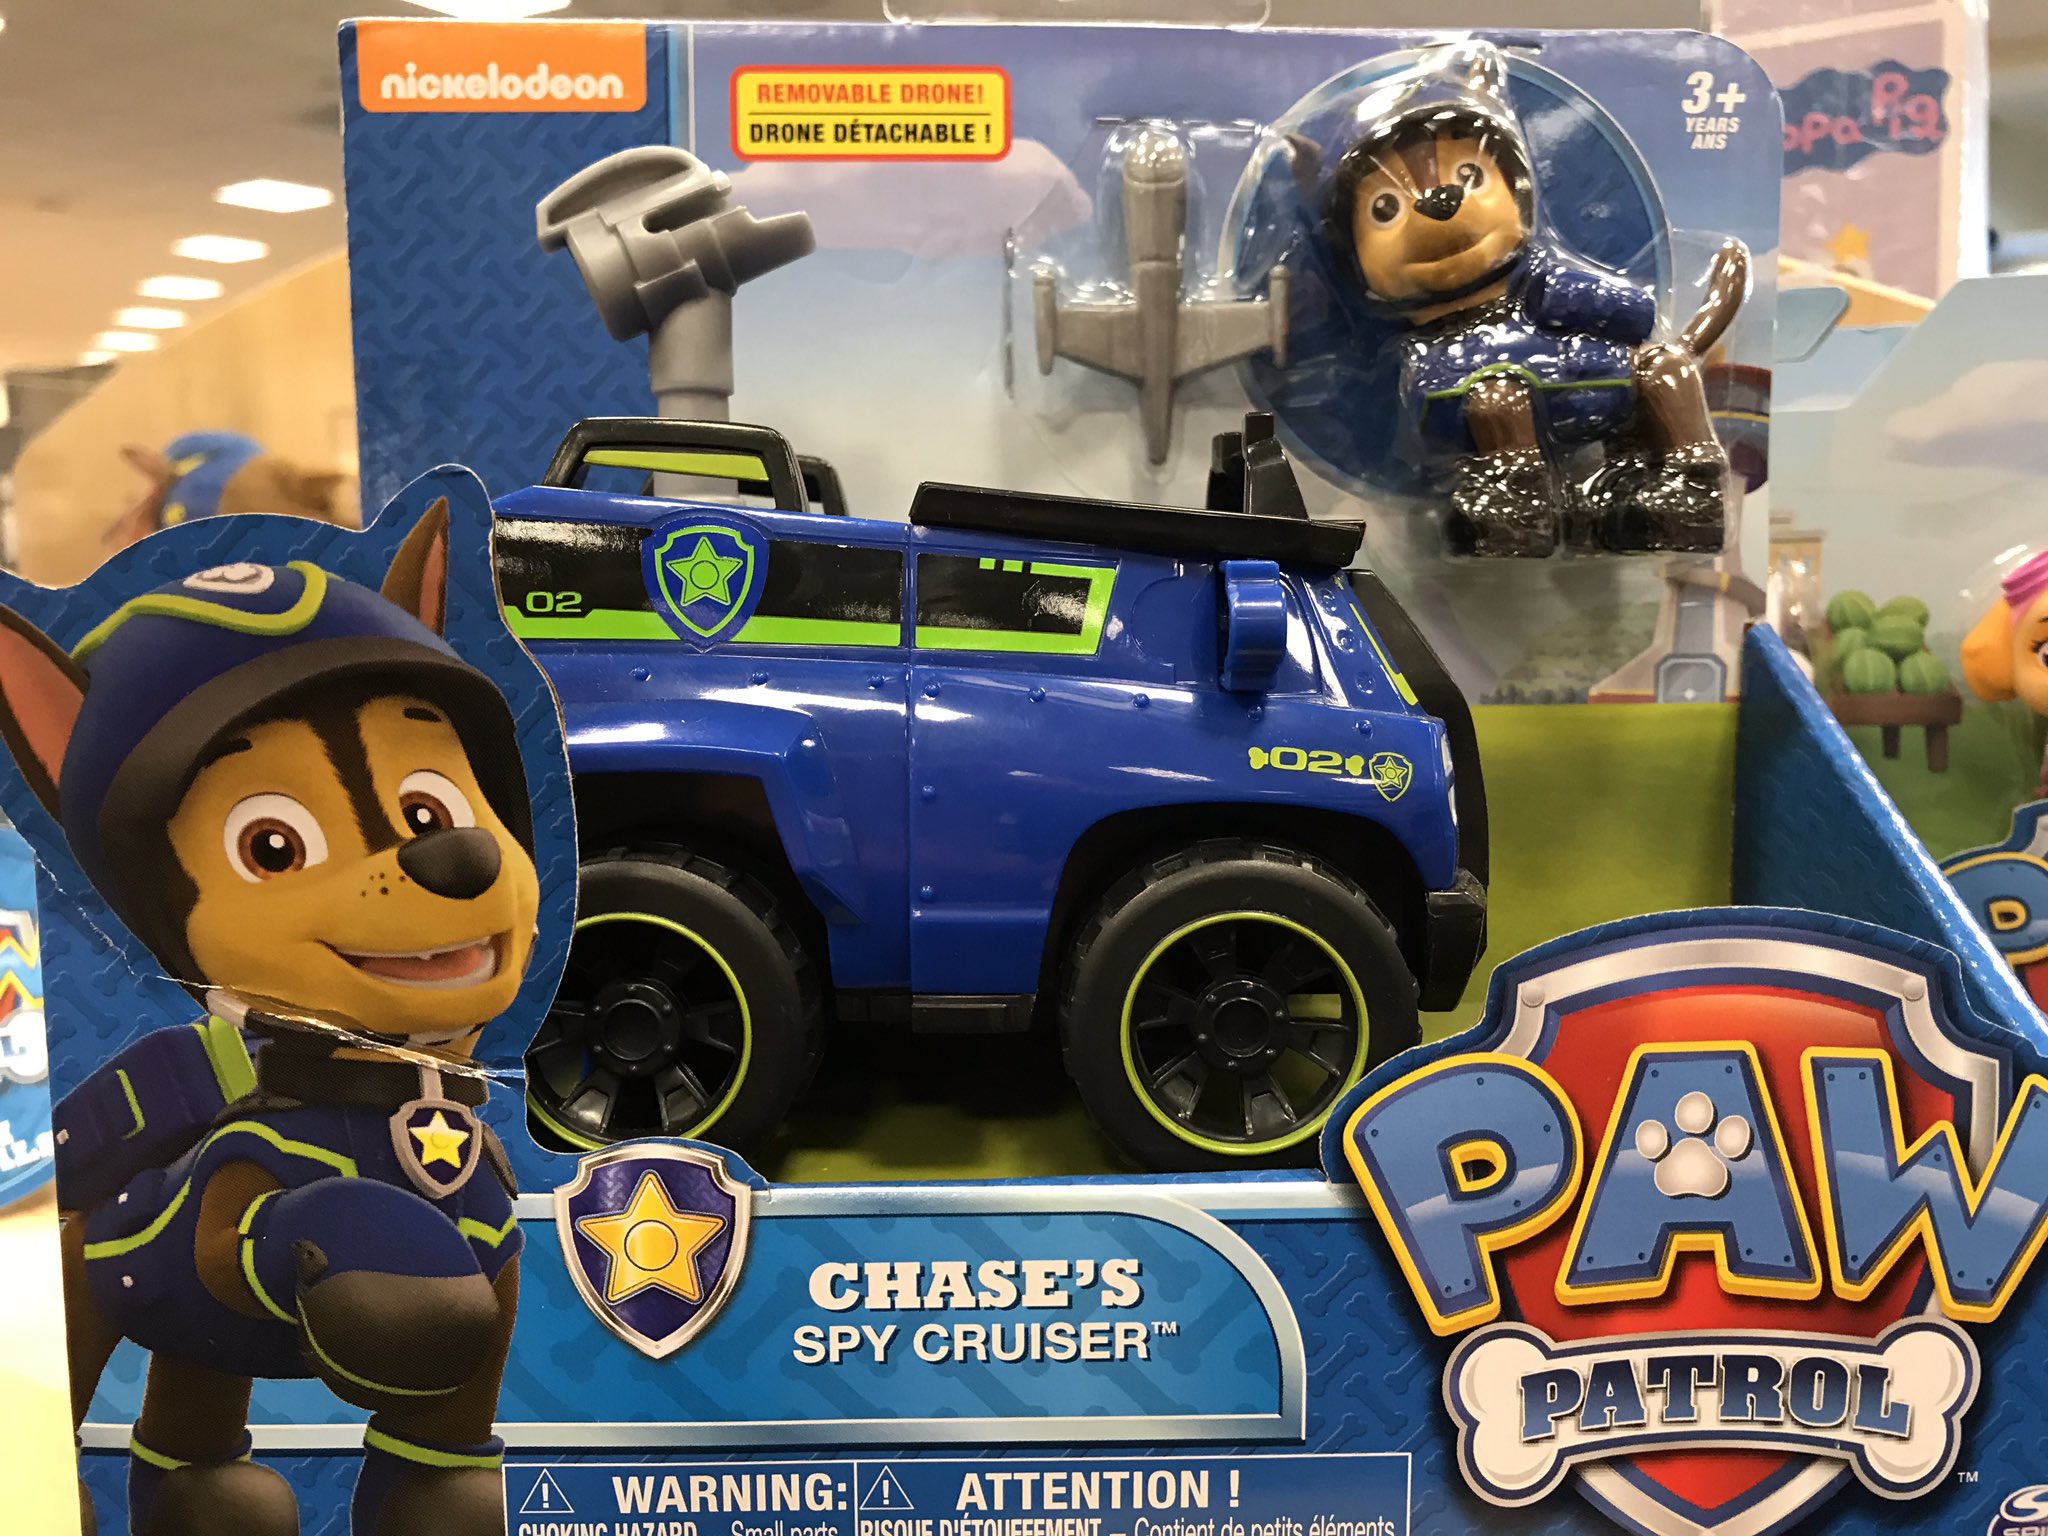 Se insekter tack ære Jay Annelli on Twitter: "Me: 'Maybe I should ease off the PAW Patrol  tongue-in-cheek critiques?' *Stumbles across drone strike puppy* Rima: “Why  are you taking a picture of that one?” Me: “The